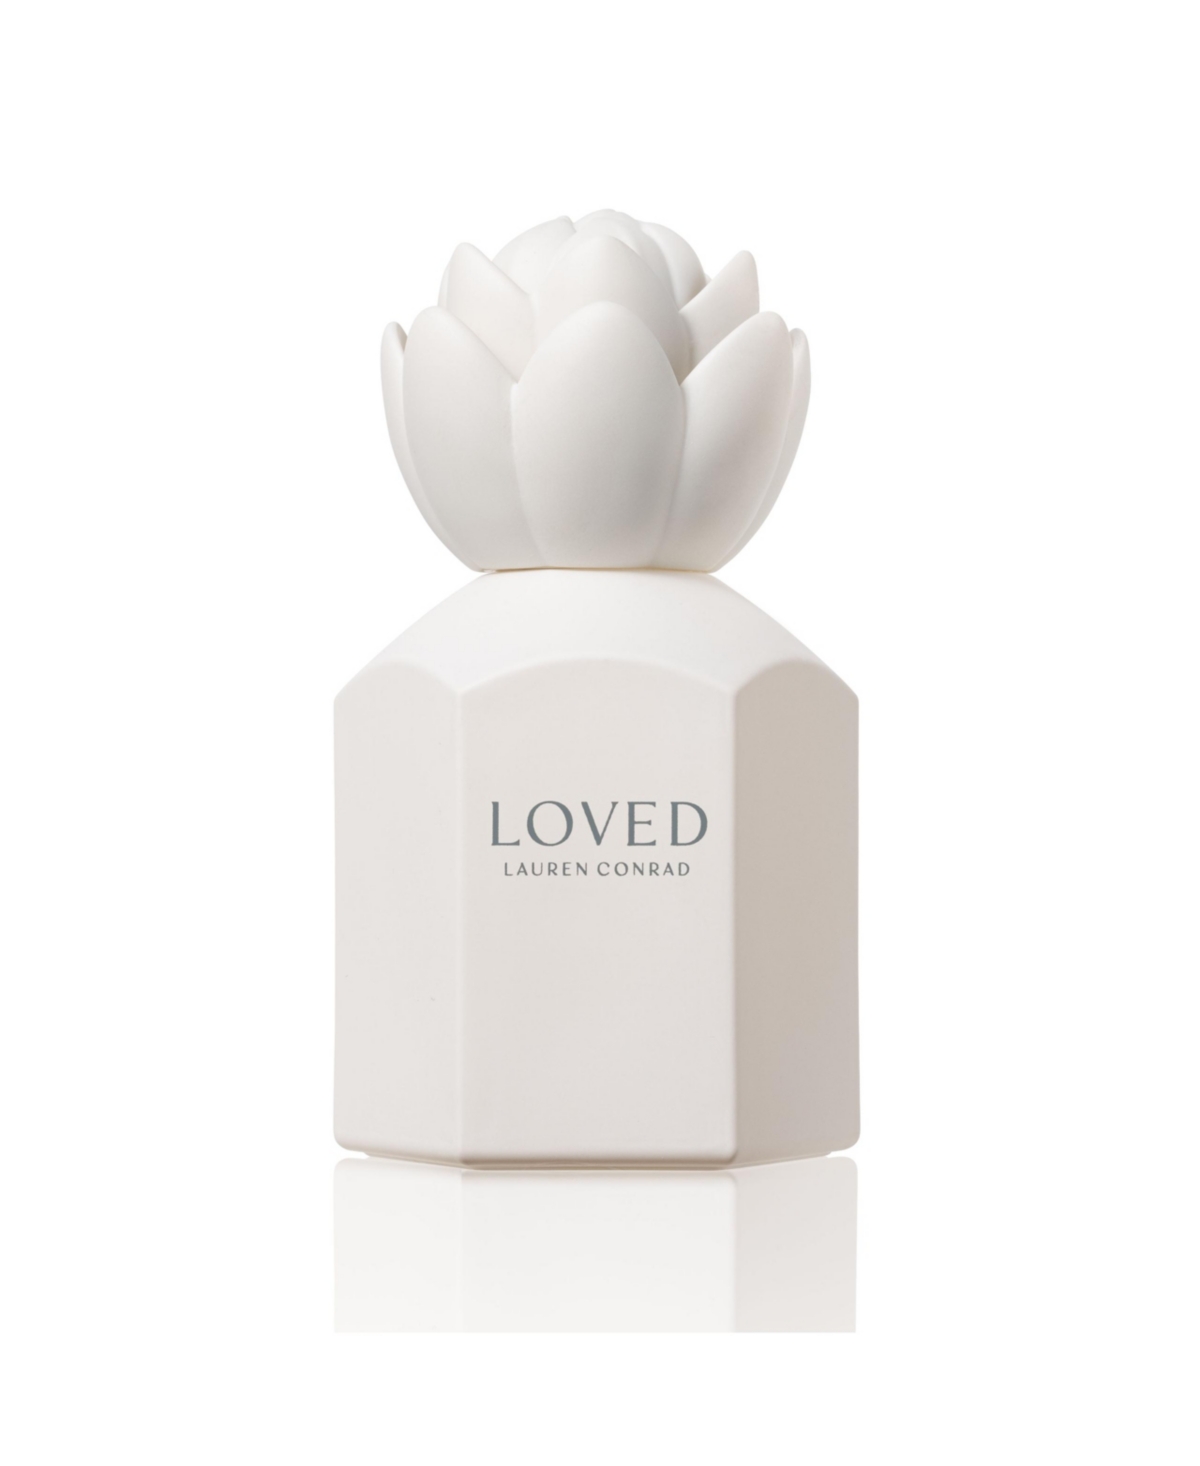 Loved Eau de Parfum by Lauren Conrad - Fragrance for Women - Feminine, Floral Scent with Notes of Citrus, White Tea, Jasmine, and Peony -